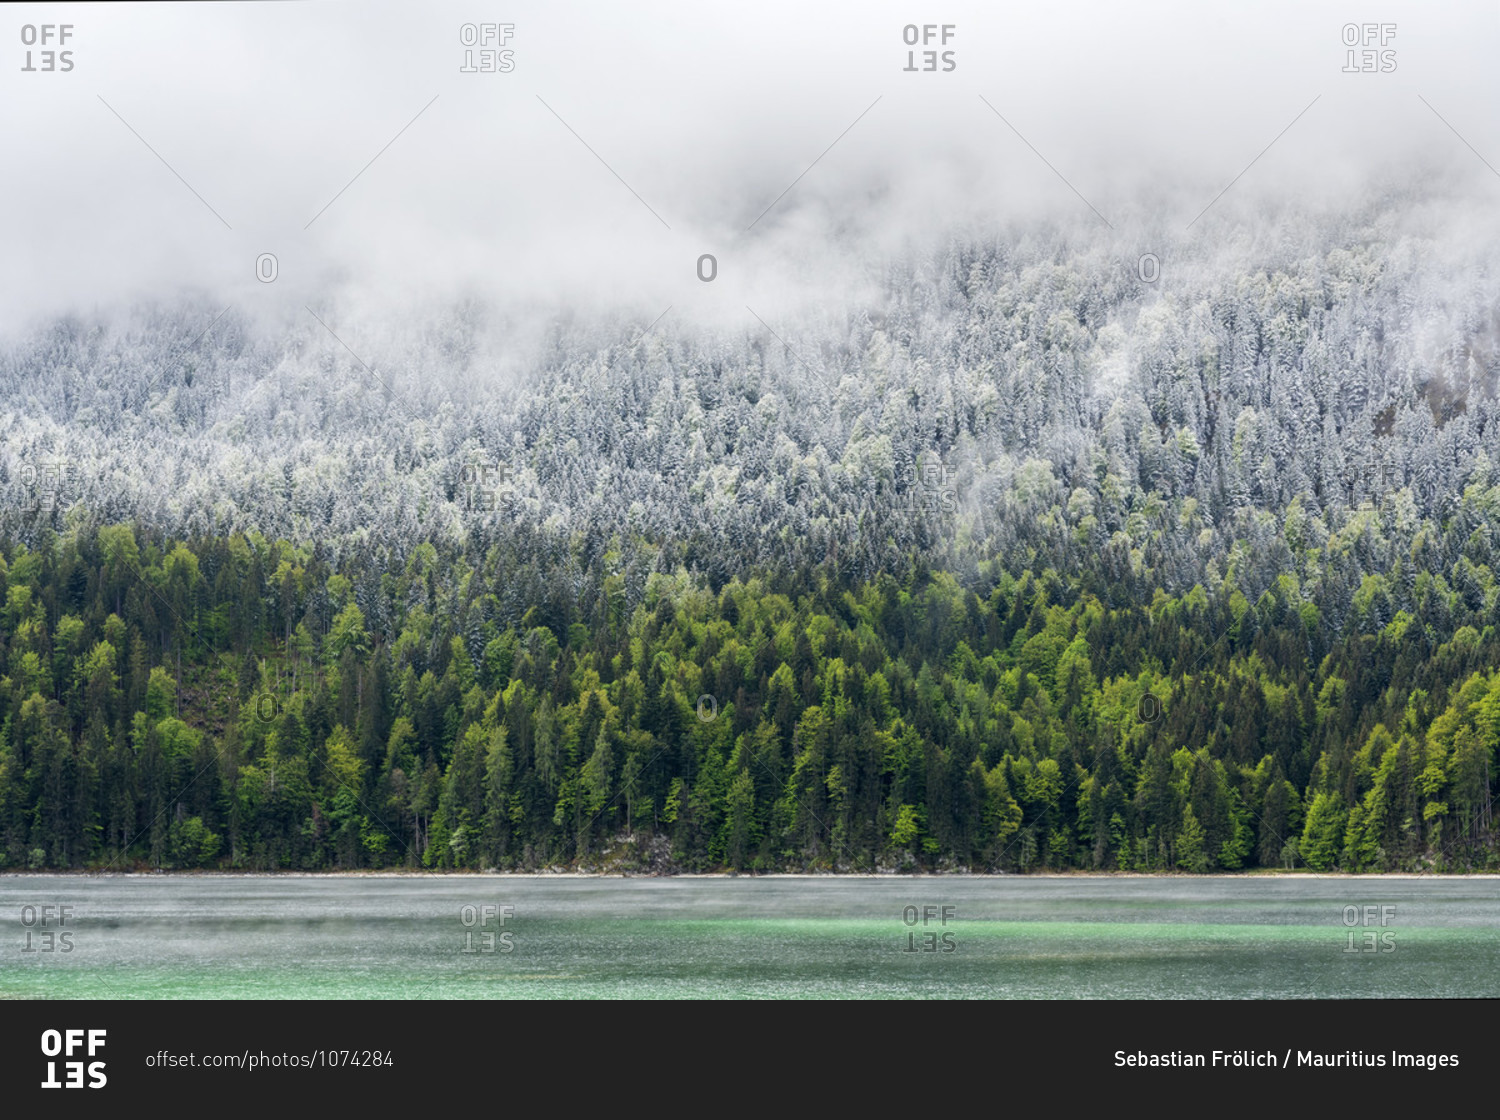 Shore of the eibsee during the eisheiligen. turquoise blue water, green forest, fresh snow and thick clouds divide this picture into four areas.